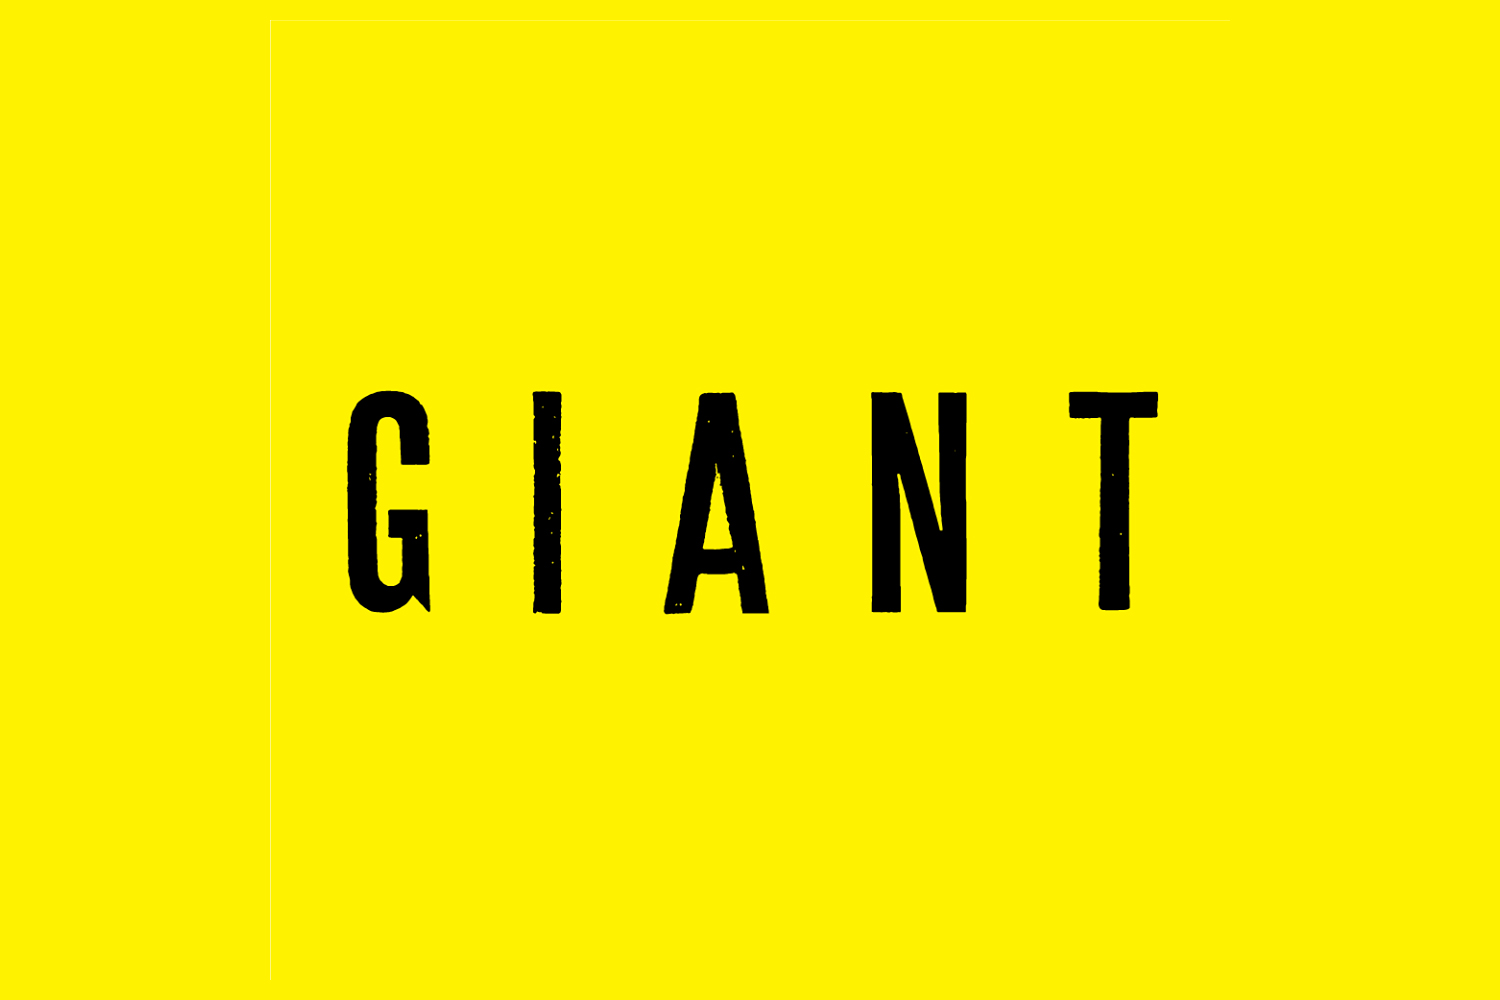 Logotype for Chicago restaurant Giant by Also Design, United States